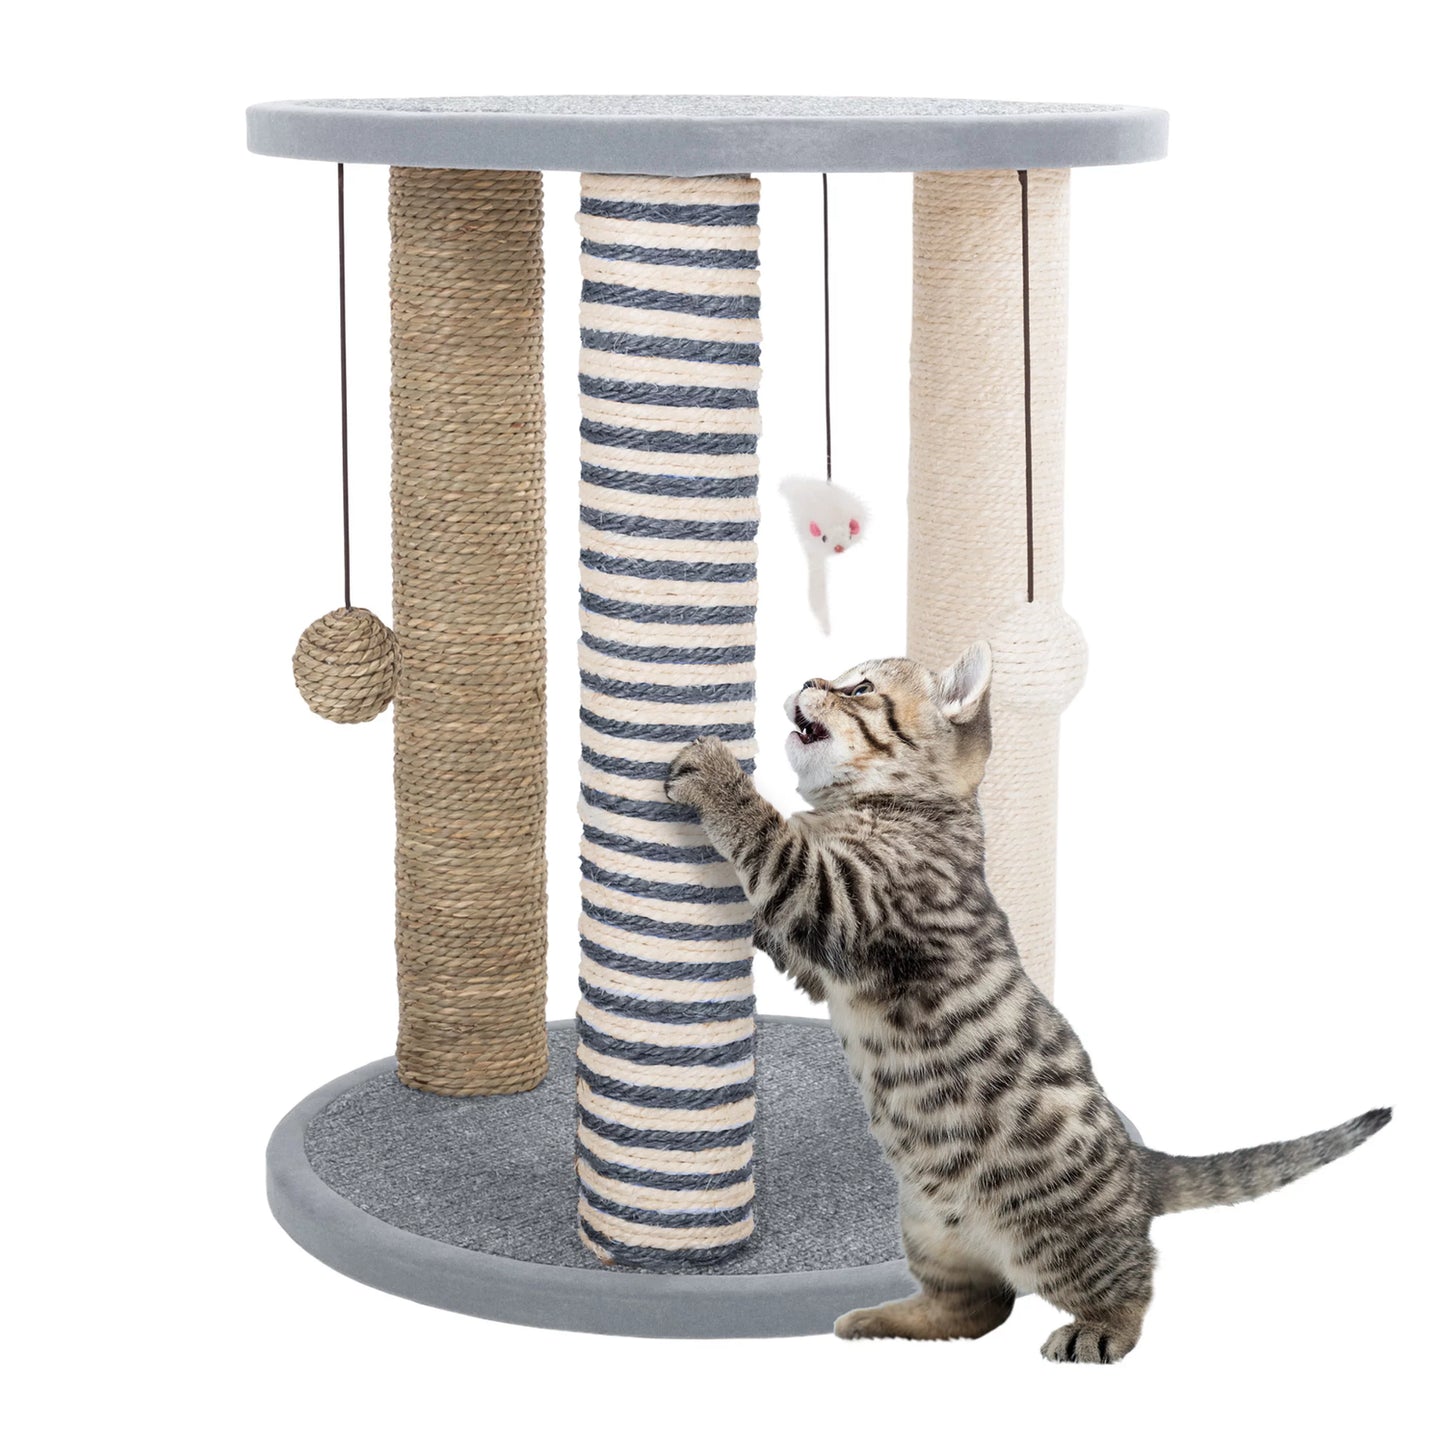 Cat Tower with 3 Scratching Posts, Carpeted Base Play Area and Perch – Furniture Scratching Deterrent Tree for Indoor Cats by PETMAKER (Gray)